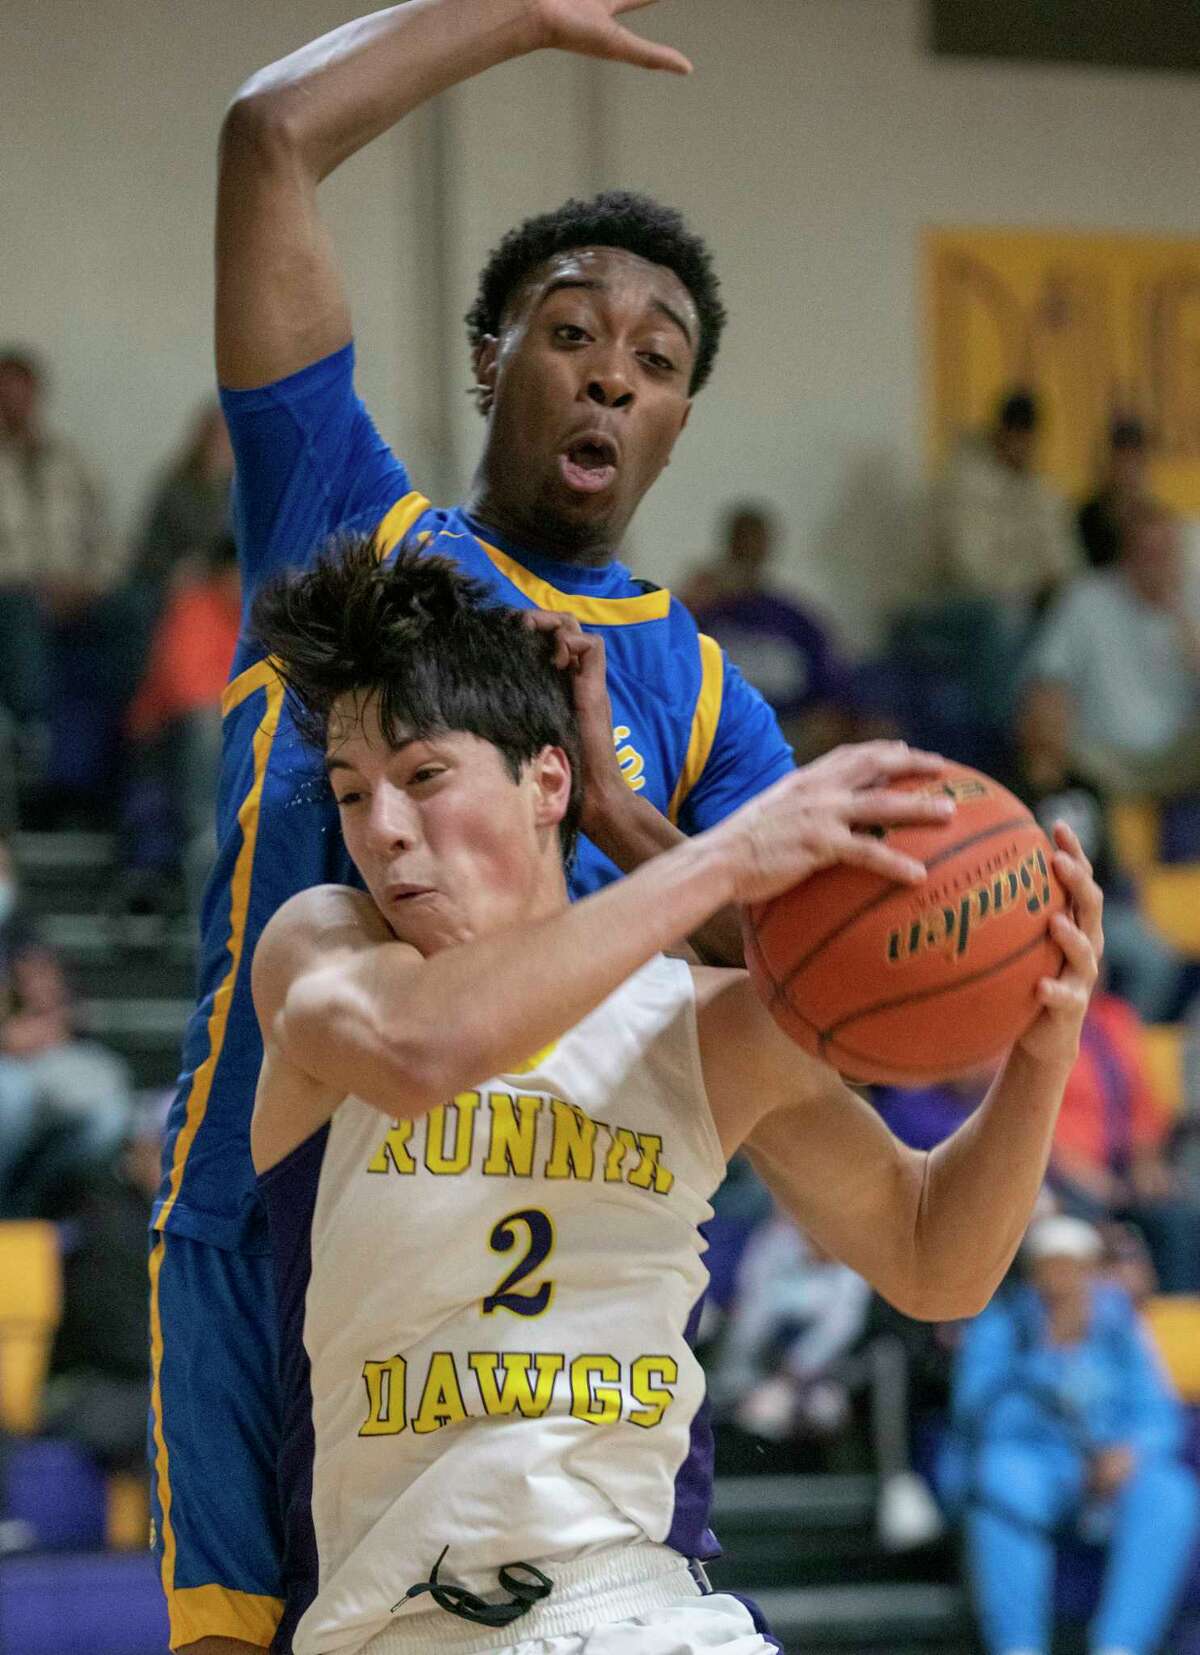 Midland High's Santiago Salcedo draws the foul of Frenship's Tajavis Miller as he attempts a layup 01/14/2022 at Midland High gym. Frenship went on to win 55-32. Tim Fischer/Reporter-Telegram